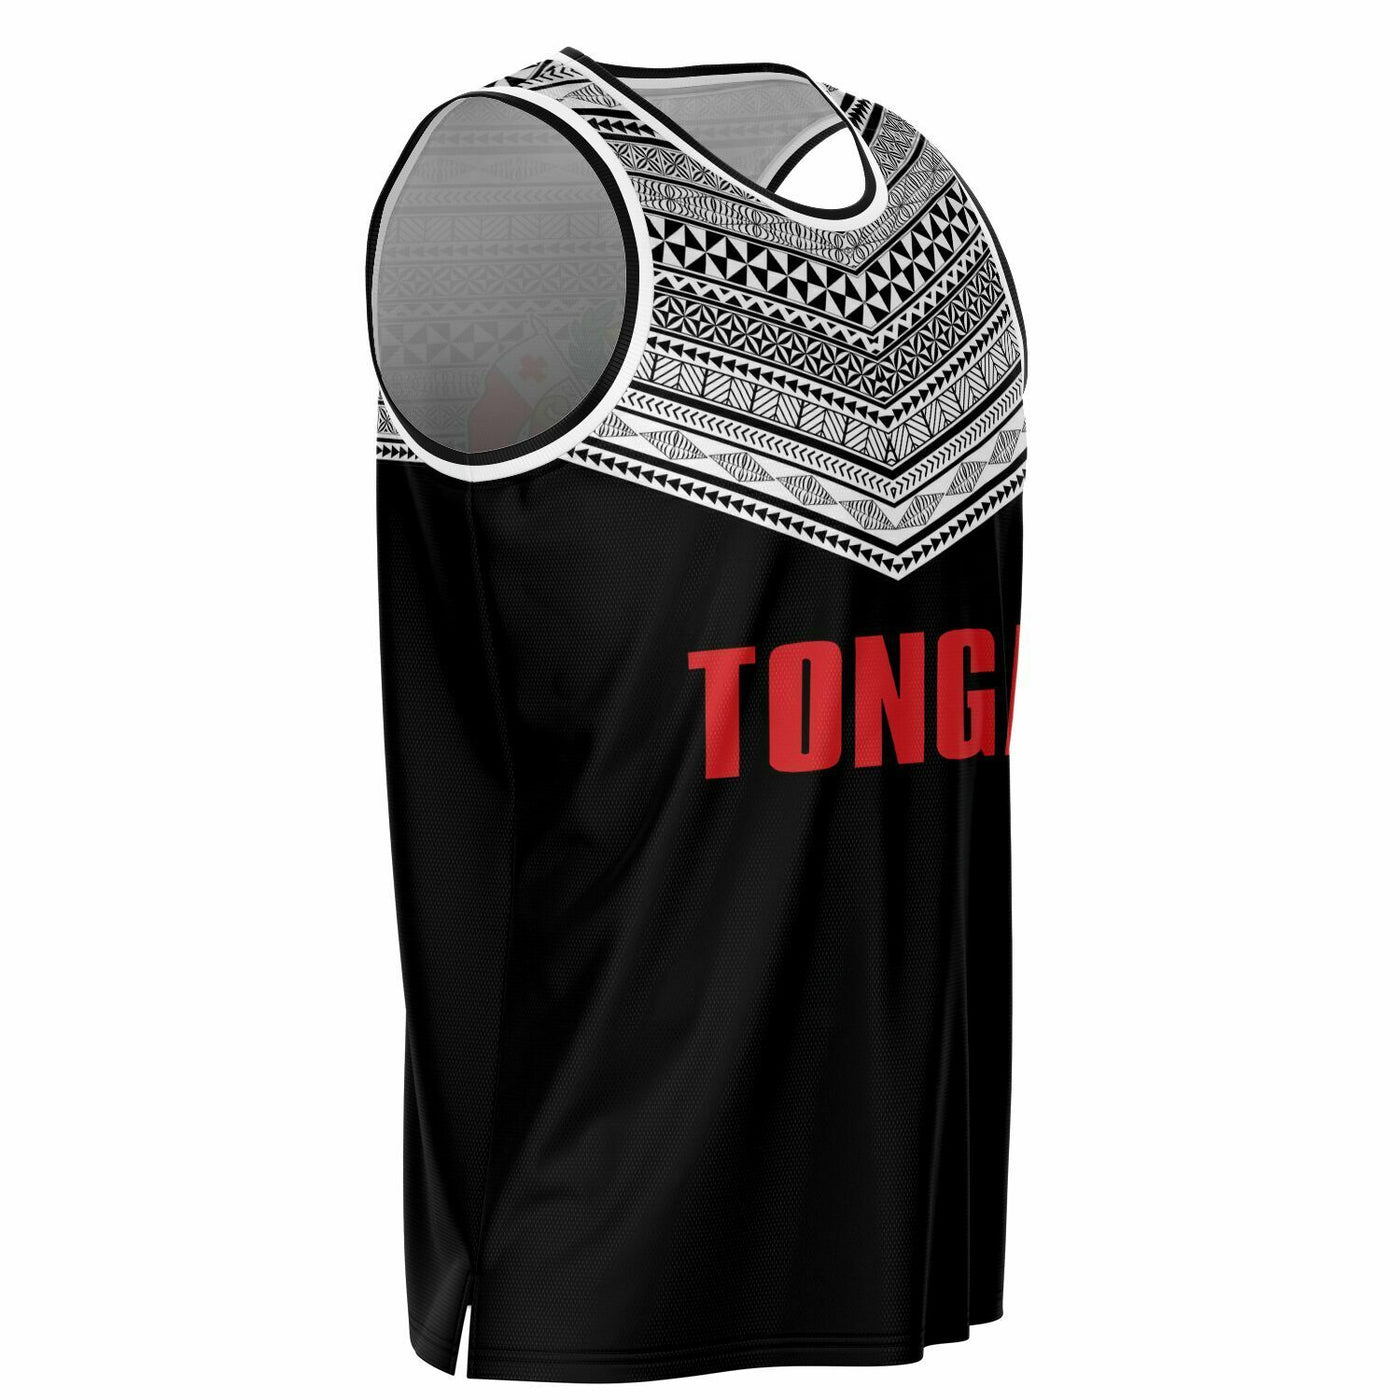 red and black basketball jersey